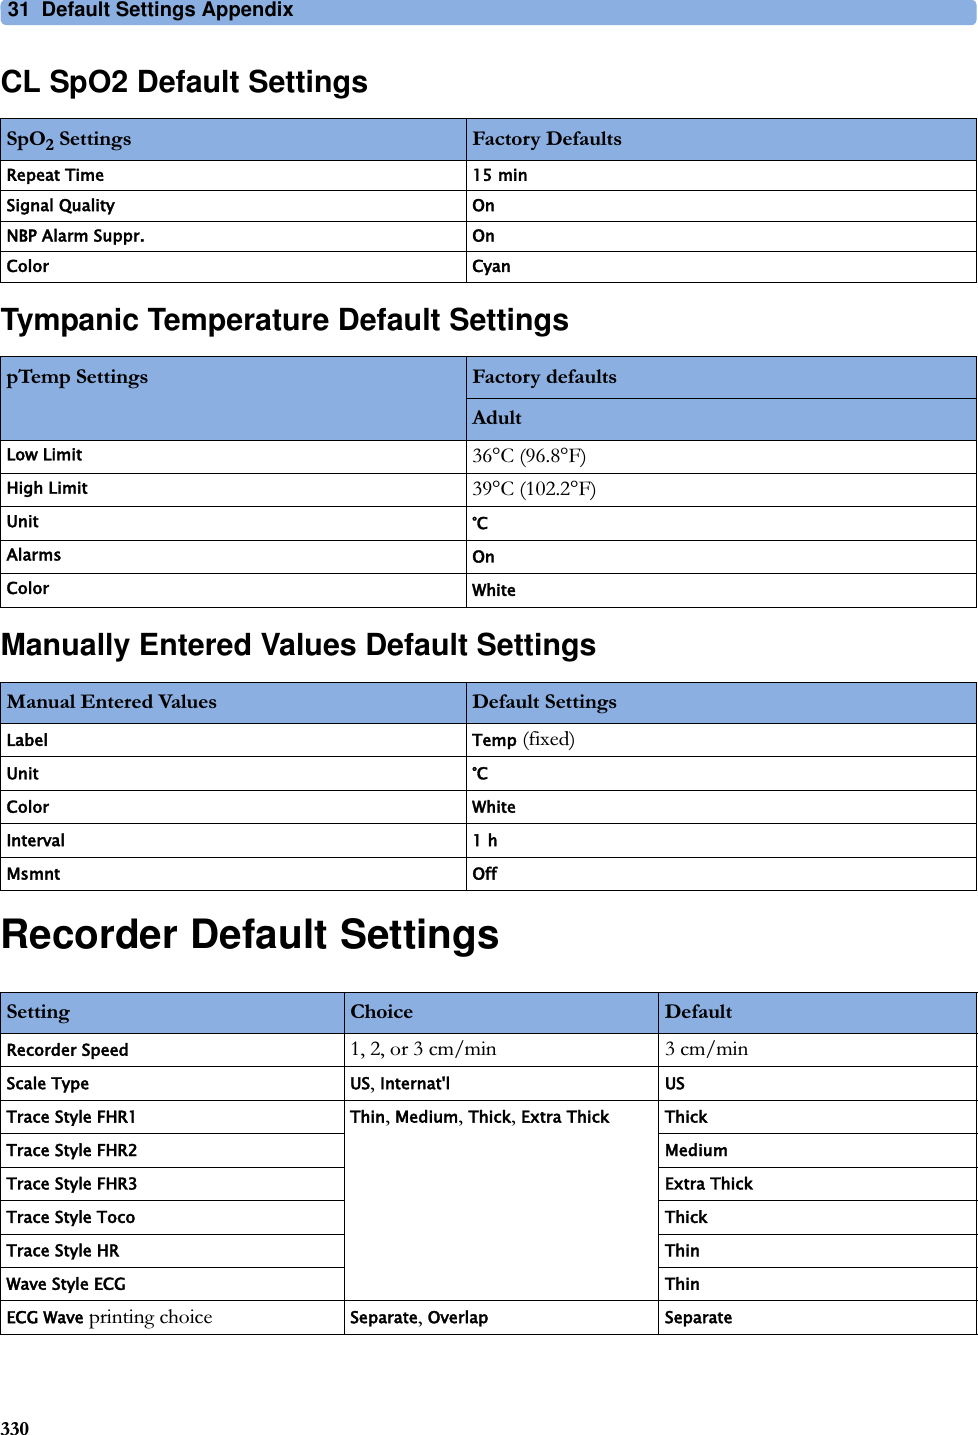 31  Default Settings Appendix330CL SpO2 Default SettingsTympanic Temperature Default SettingsManually Entered Values Default SettingsRecorder Default SettingsSpO2 Settings Factory DefaultsRepeat Time 15 minSignal Quality OnNBP Alarm Suppr. OnColor CyanpTemp Settings Factory defaultsAdultLow Limit36°C (96.8°F)High Limit39°C (102.2°F)Unit °CAlarms OnColor WhiteManual Entered Values Default SettingsLabel Temp (fixed)Unit °CColor WhiteInterval 1 hMsmnt OffSetting Choice DefaultRecorder Speed1, 2, or 3 cm/min 3 cm/minScale Type US, Internat&apos;l USTrace Style FHR1 Thin, Medium, Thick, Extra Thick ThickTrace Style FHR2 MediumTrace Style FHR3 Extra ThickTrace Style Toco ThickTrace Style HR ThinWave Style ECG ThinECG Wave printing choiceSeparate, Overlap Separate